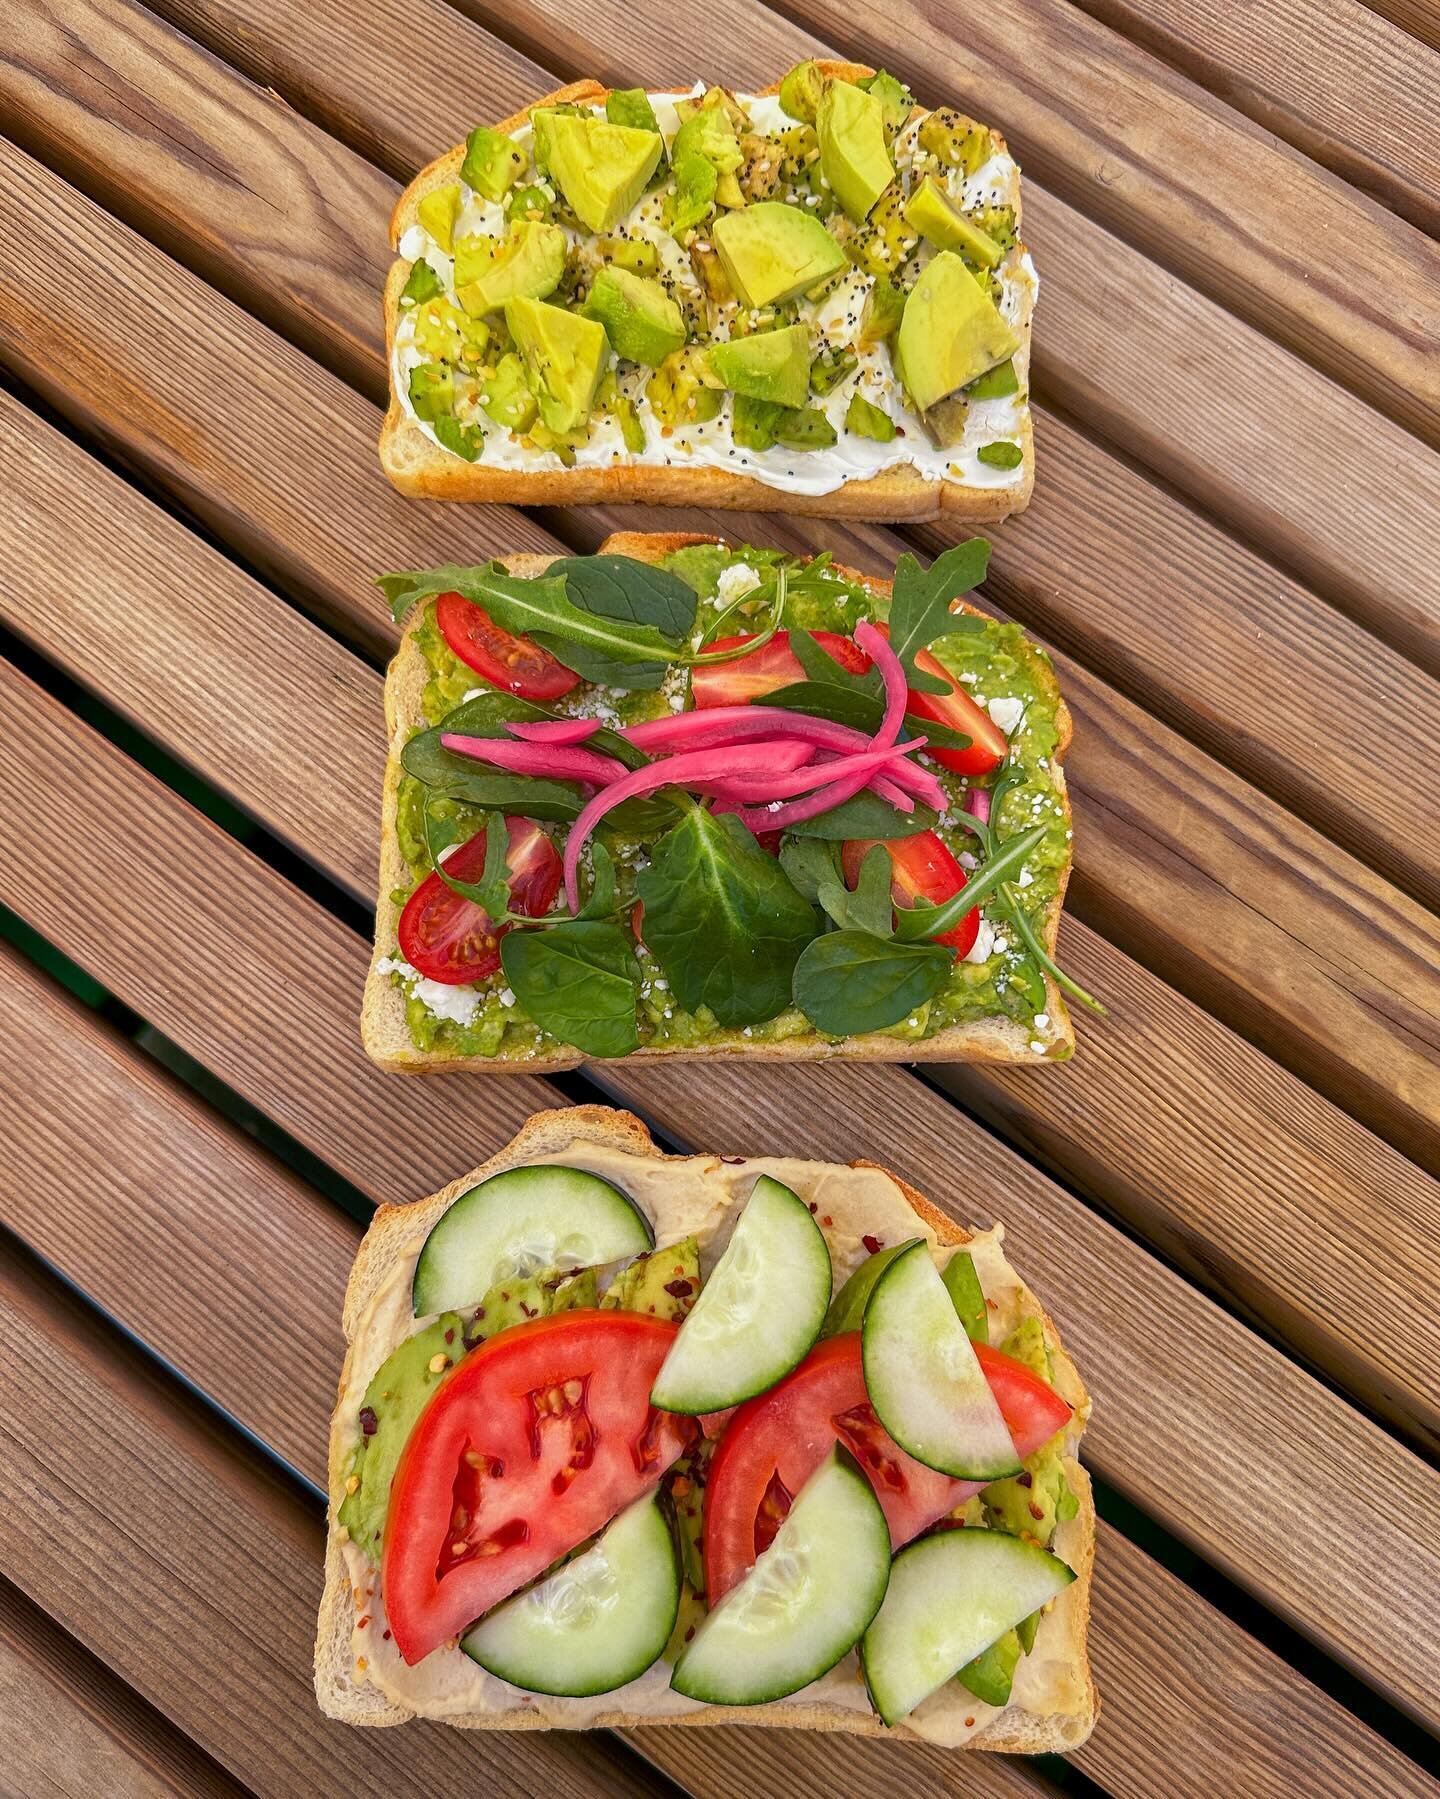 Discover a meatless marvel at Fresh Kitchen! 🌱 From quinoa salads to avocado toast, tuna wraps, and more, we&rsquo;ve got diverse options for an easy and delicious meatless Friday feast. #meatlessfriday #freshkitchen